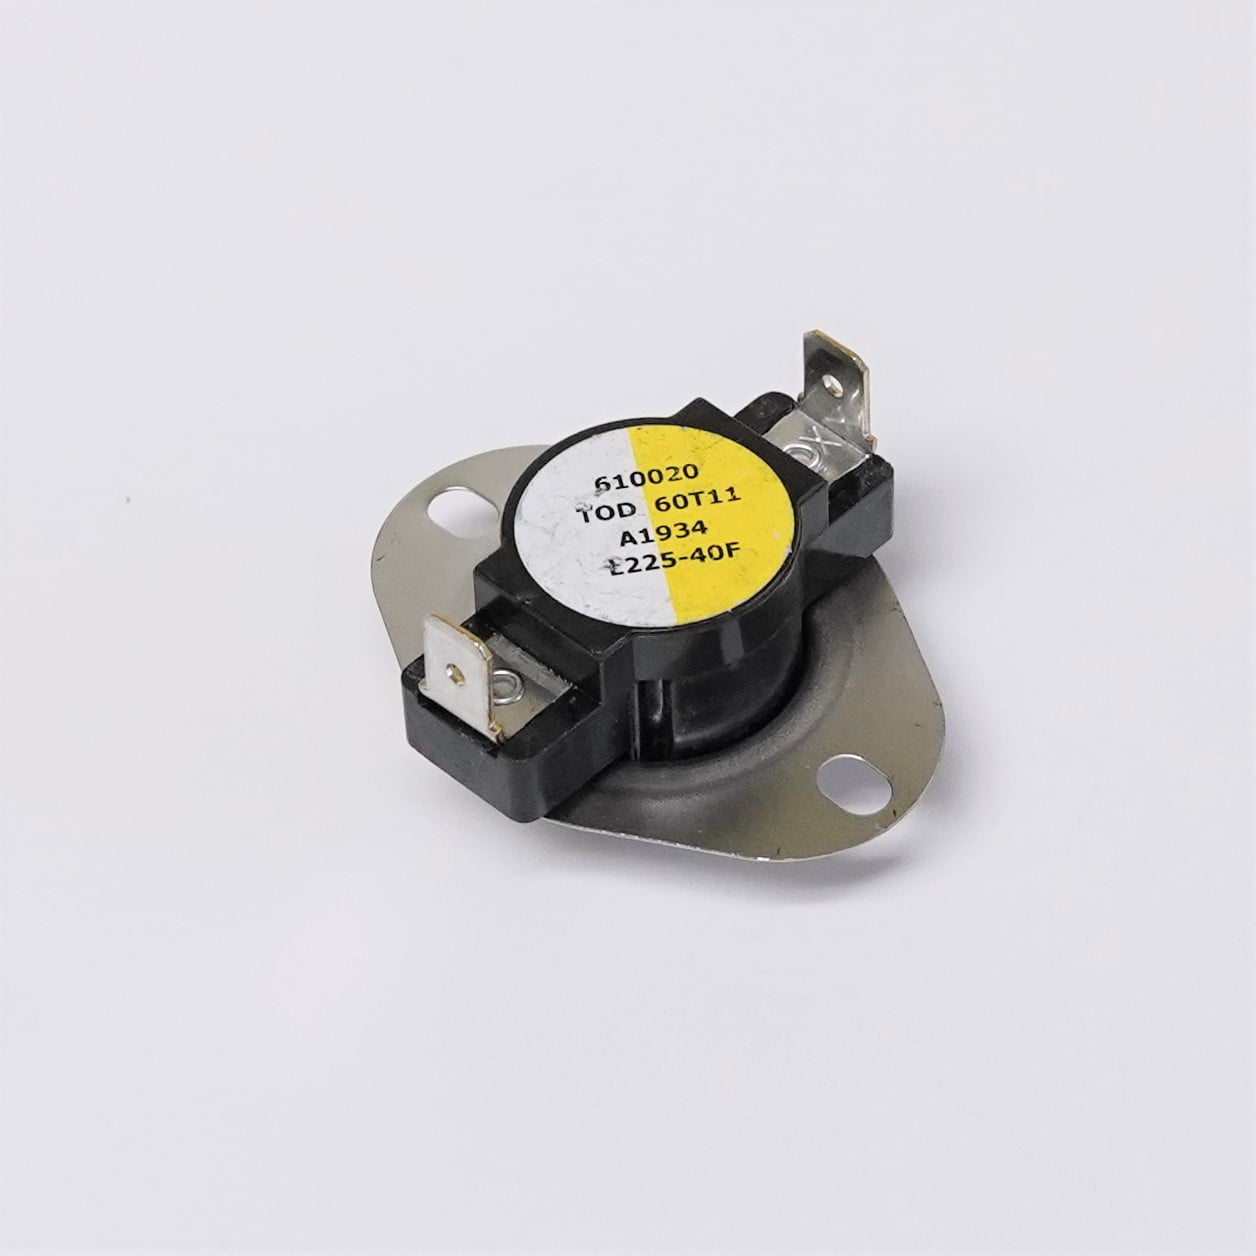 SUPCO L225 THERMOSTAT 60T11 STYLE 610020